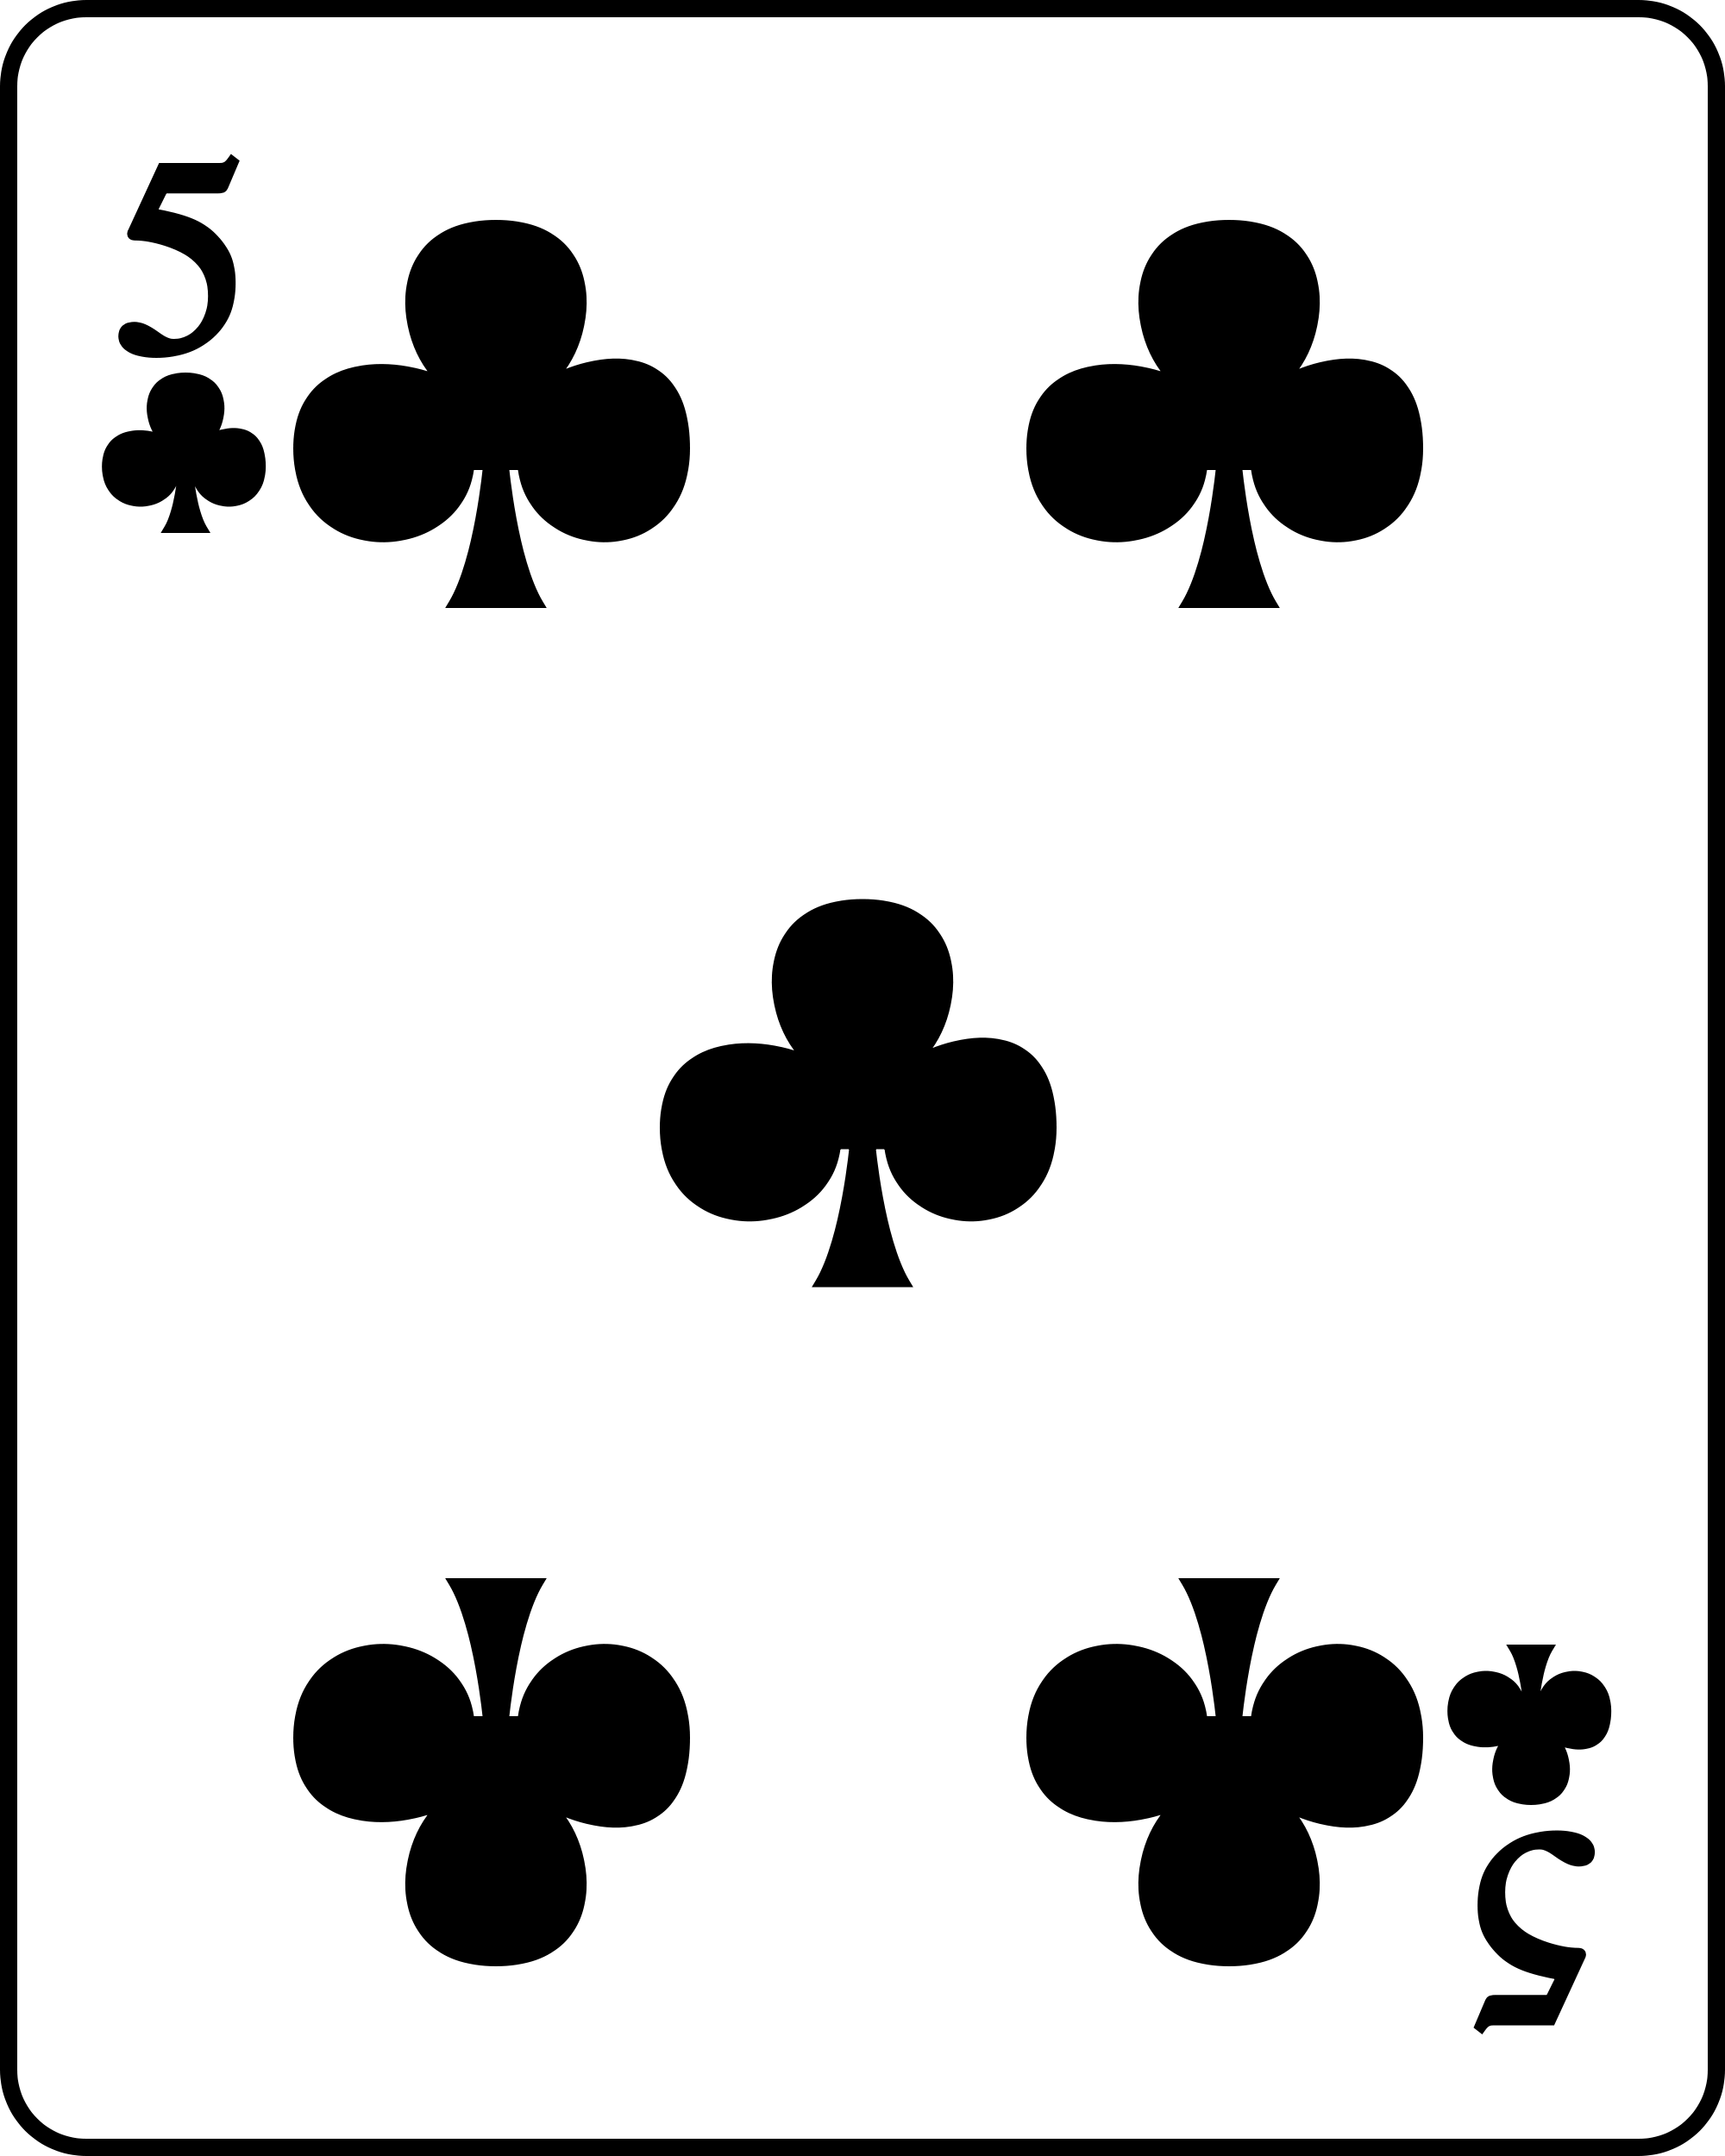 2000px-Playing_card_club_5.svg.png